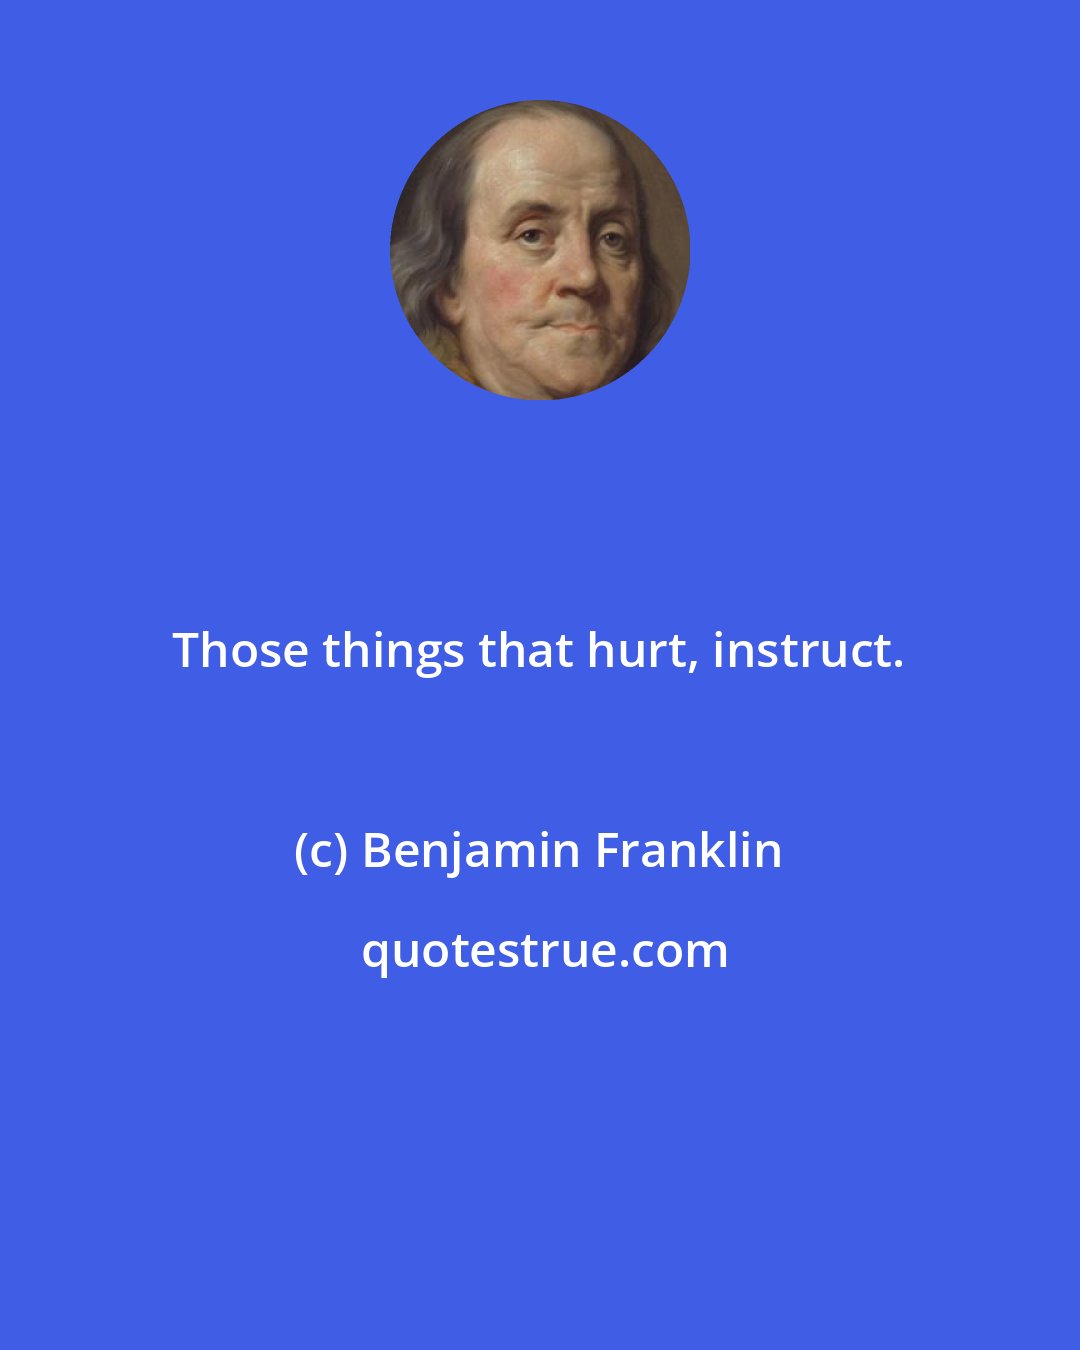 Benjamin Franklin: Those things that hurt, instruct.